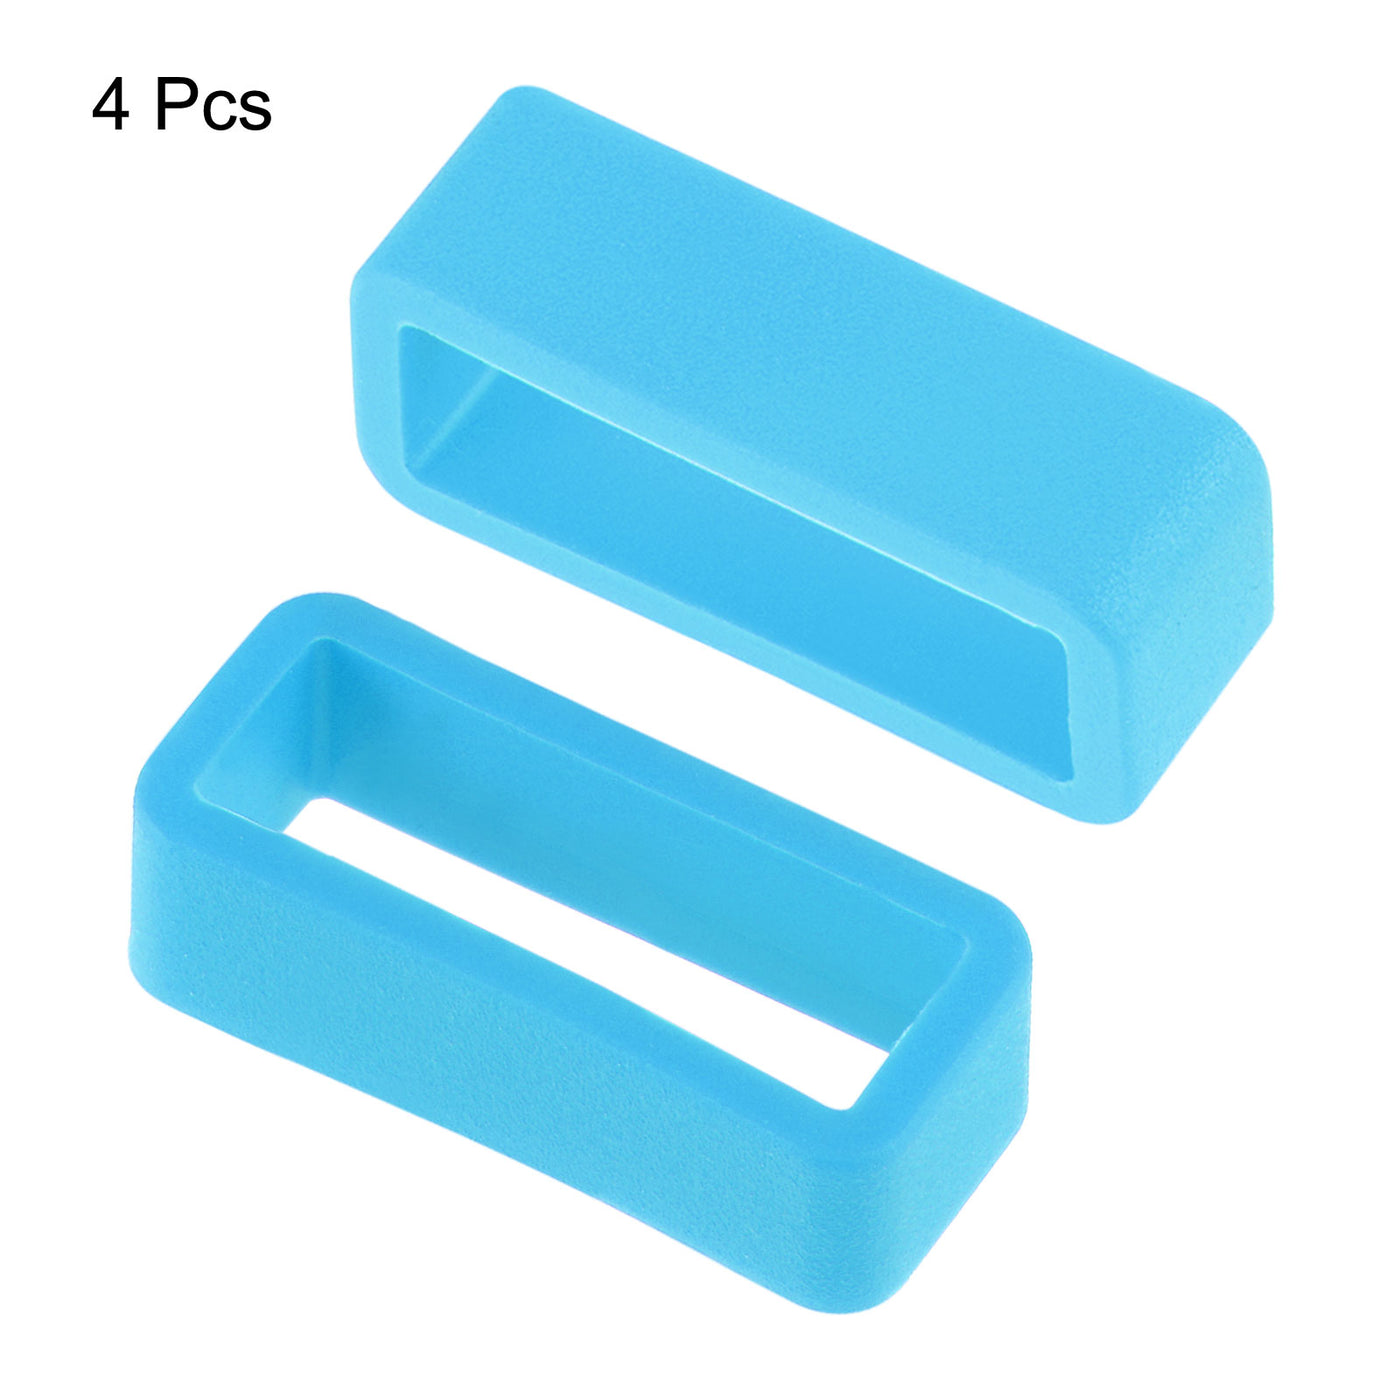 Uxcell Uxcell Watch Band Strap Loops Silicone for 19mm Width Watch Band, Light Blue 4 Pcs